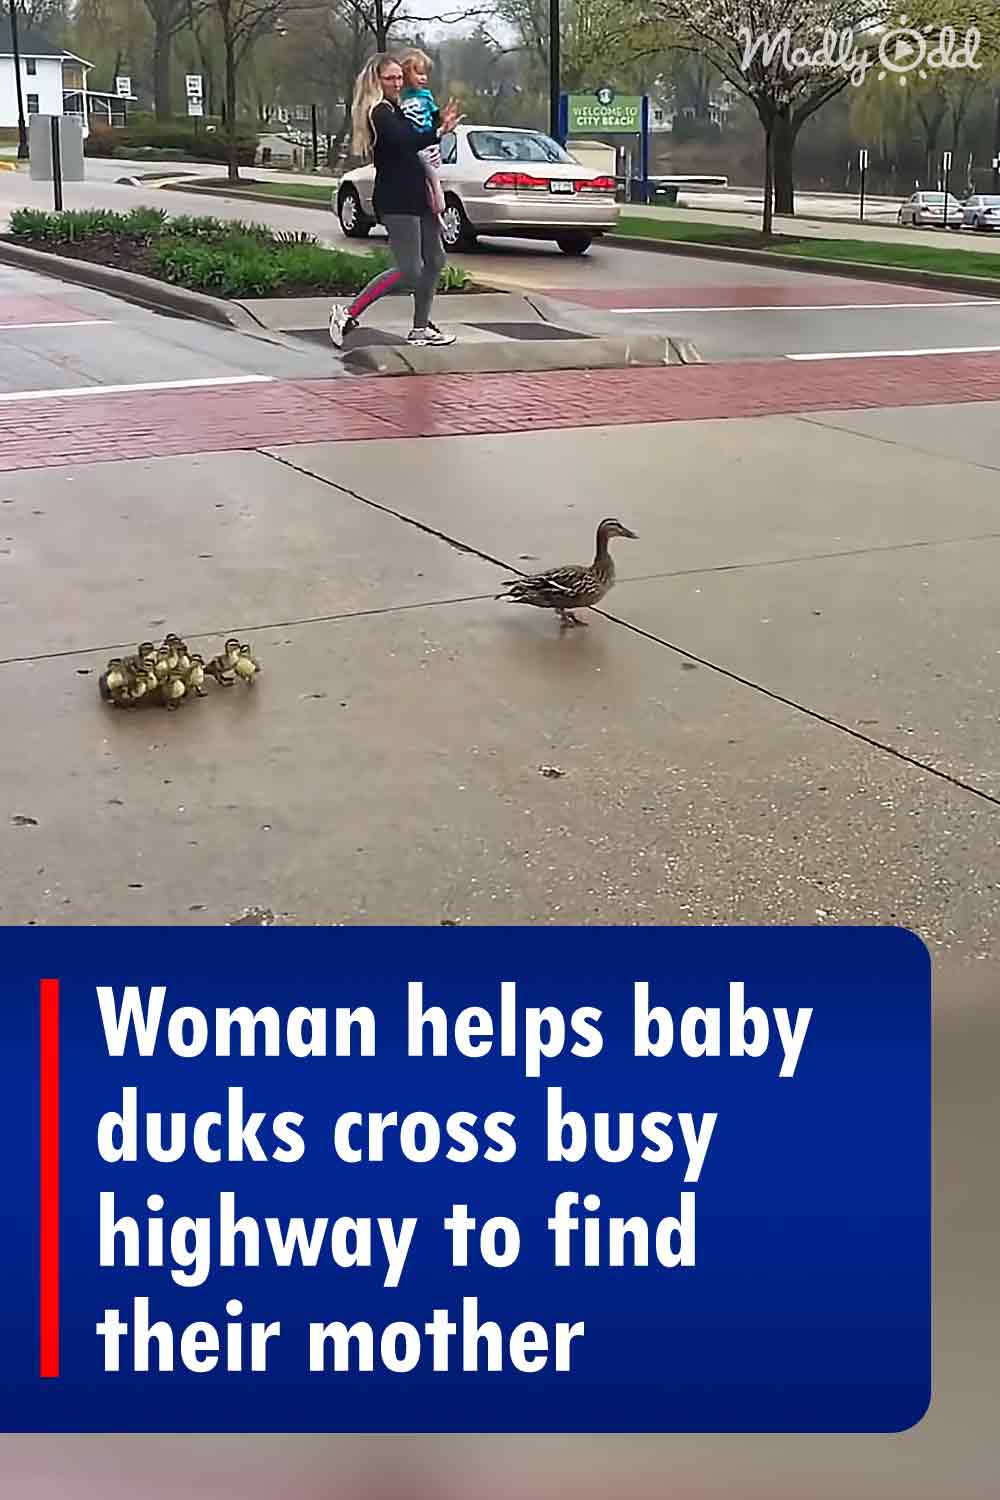 Woman helps baby ducks cross busy highway to find their mother